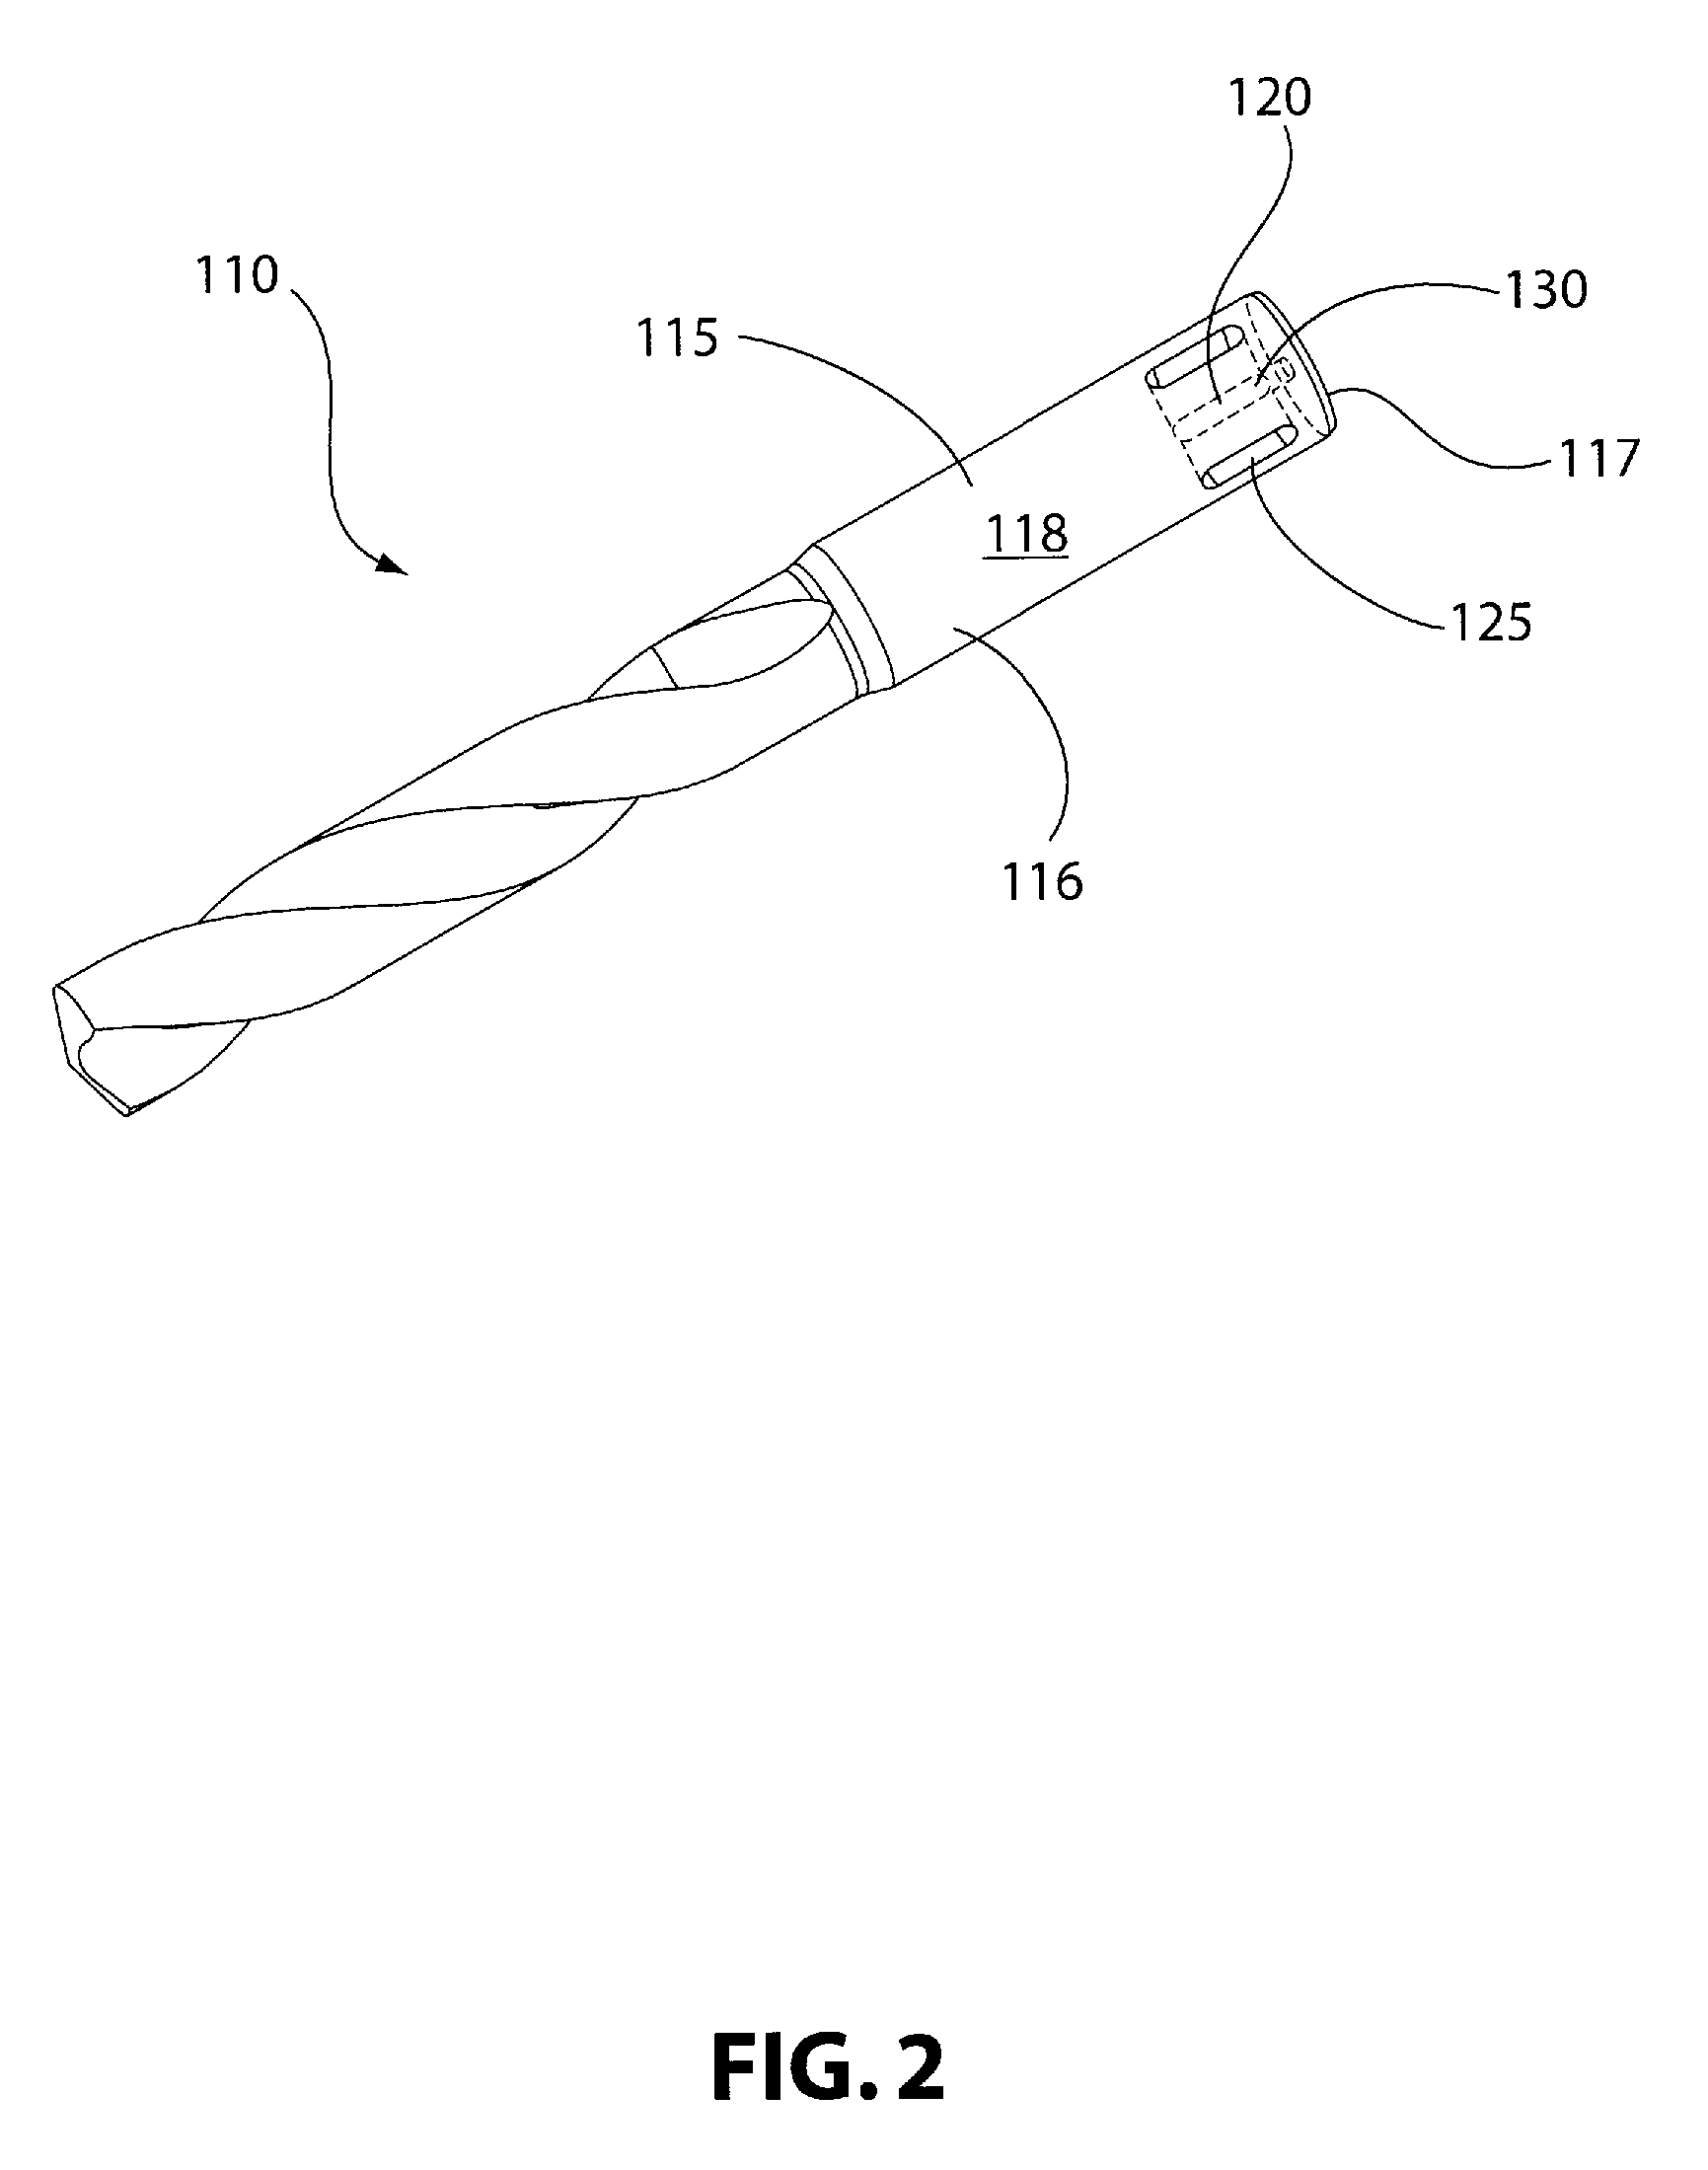 Cutting tool with integrated circuit chip